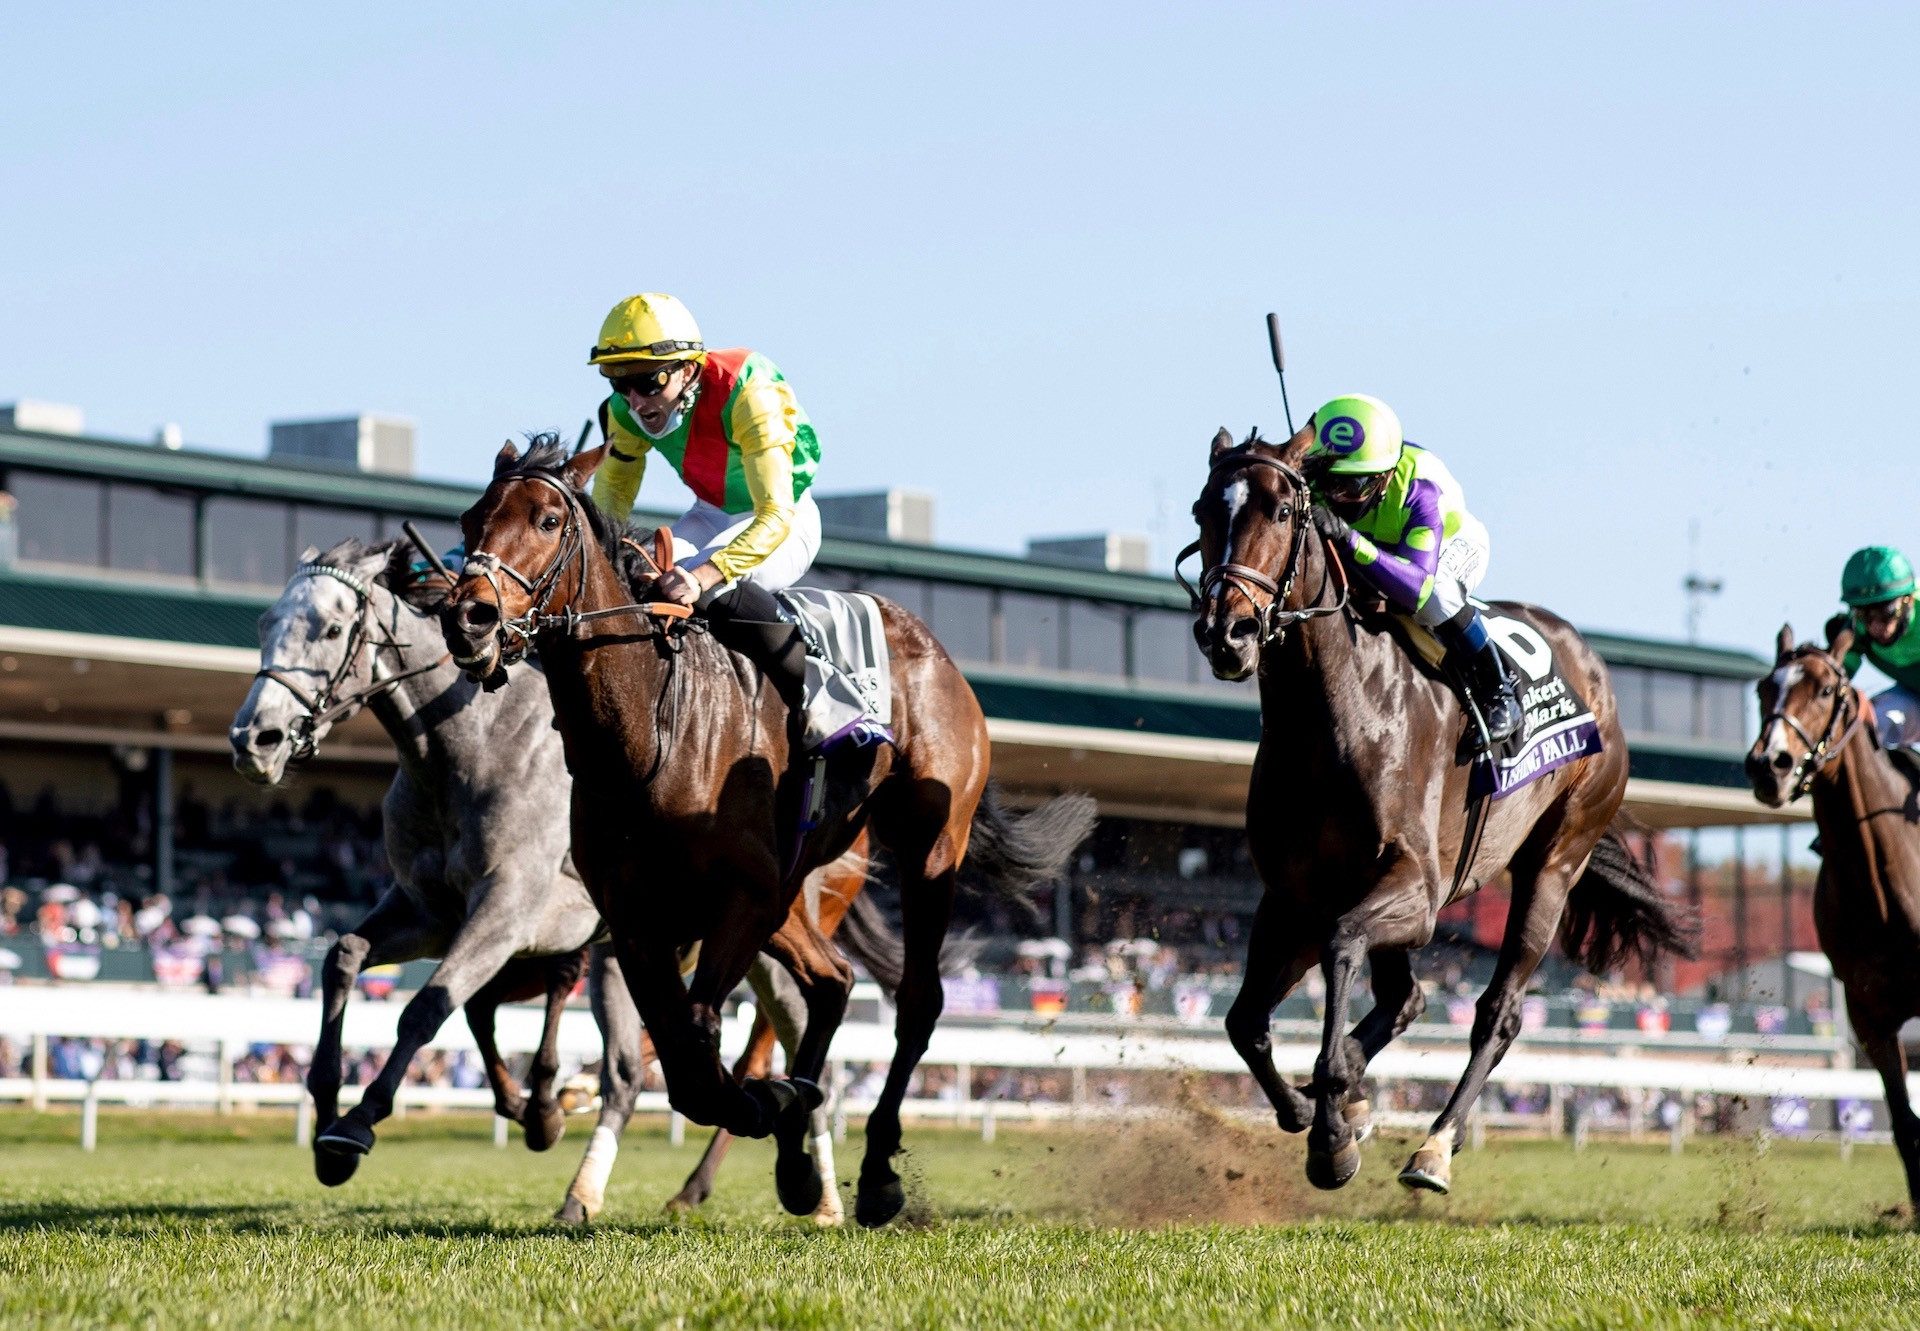 Audarya (Wootton Bassett) Wins The Gr.1 Breeders' Cup Fillies And Mares Turf at Keeneland